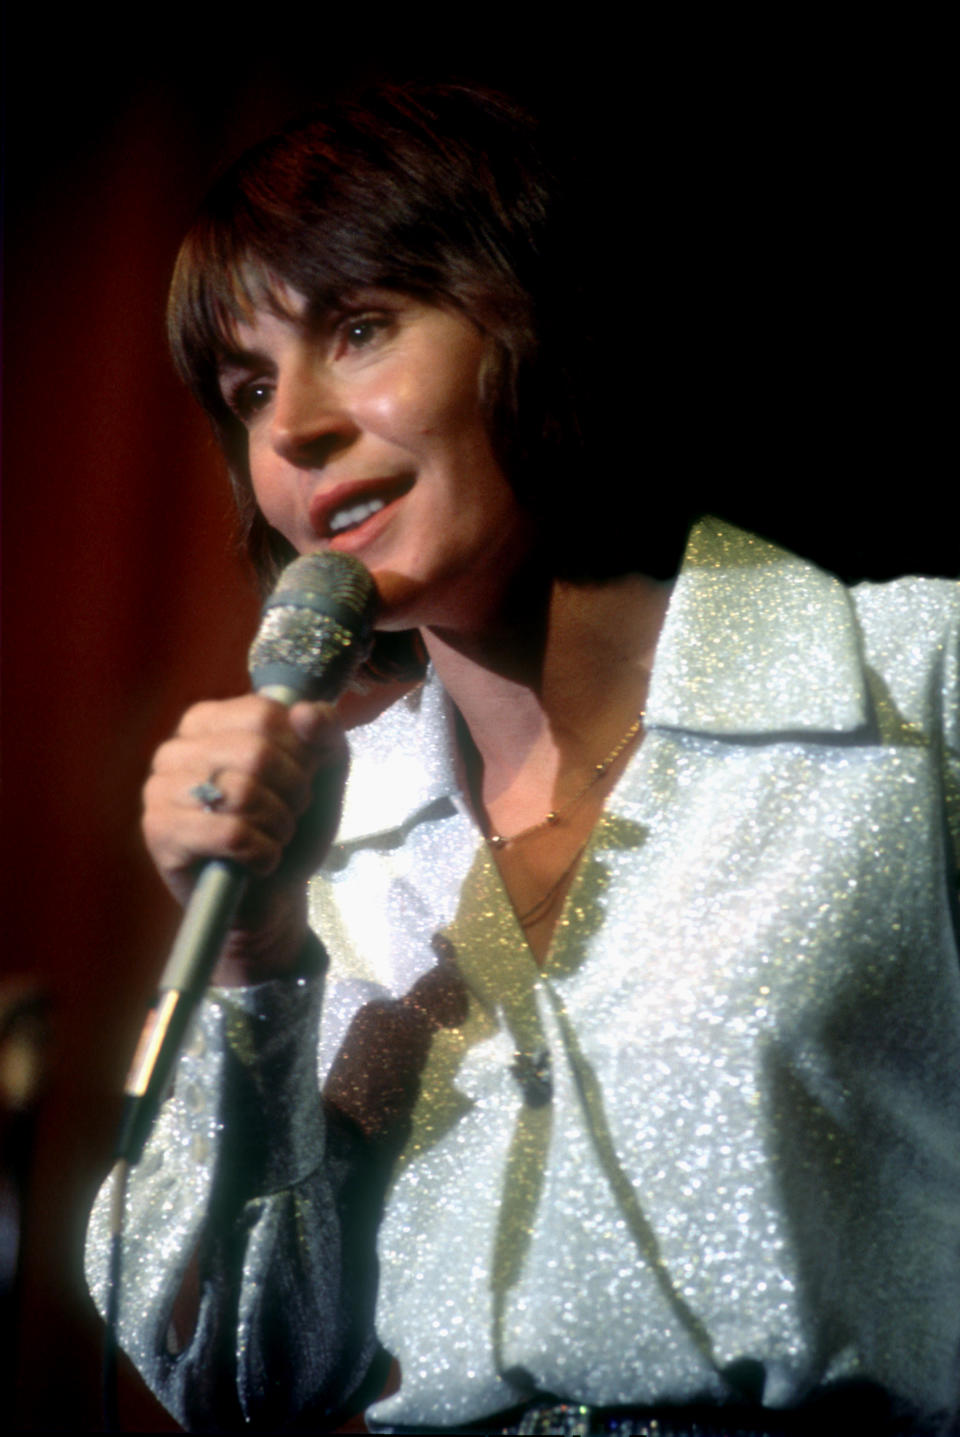 Helen Reddy is shown in an undated photo. (Photo by Michael Ochs Archives/Getty Images)